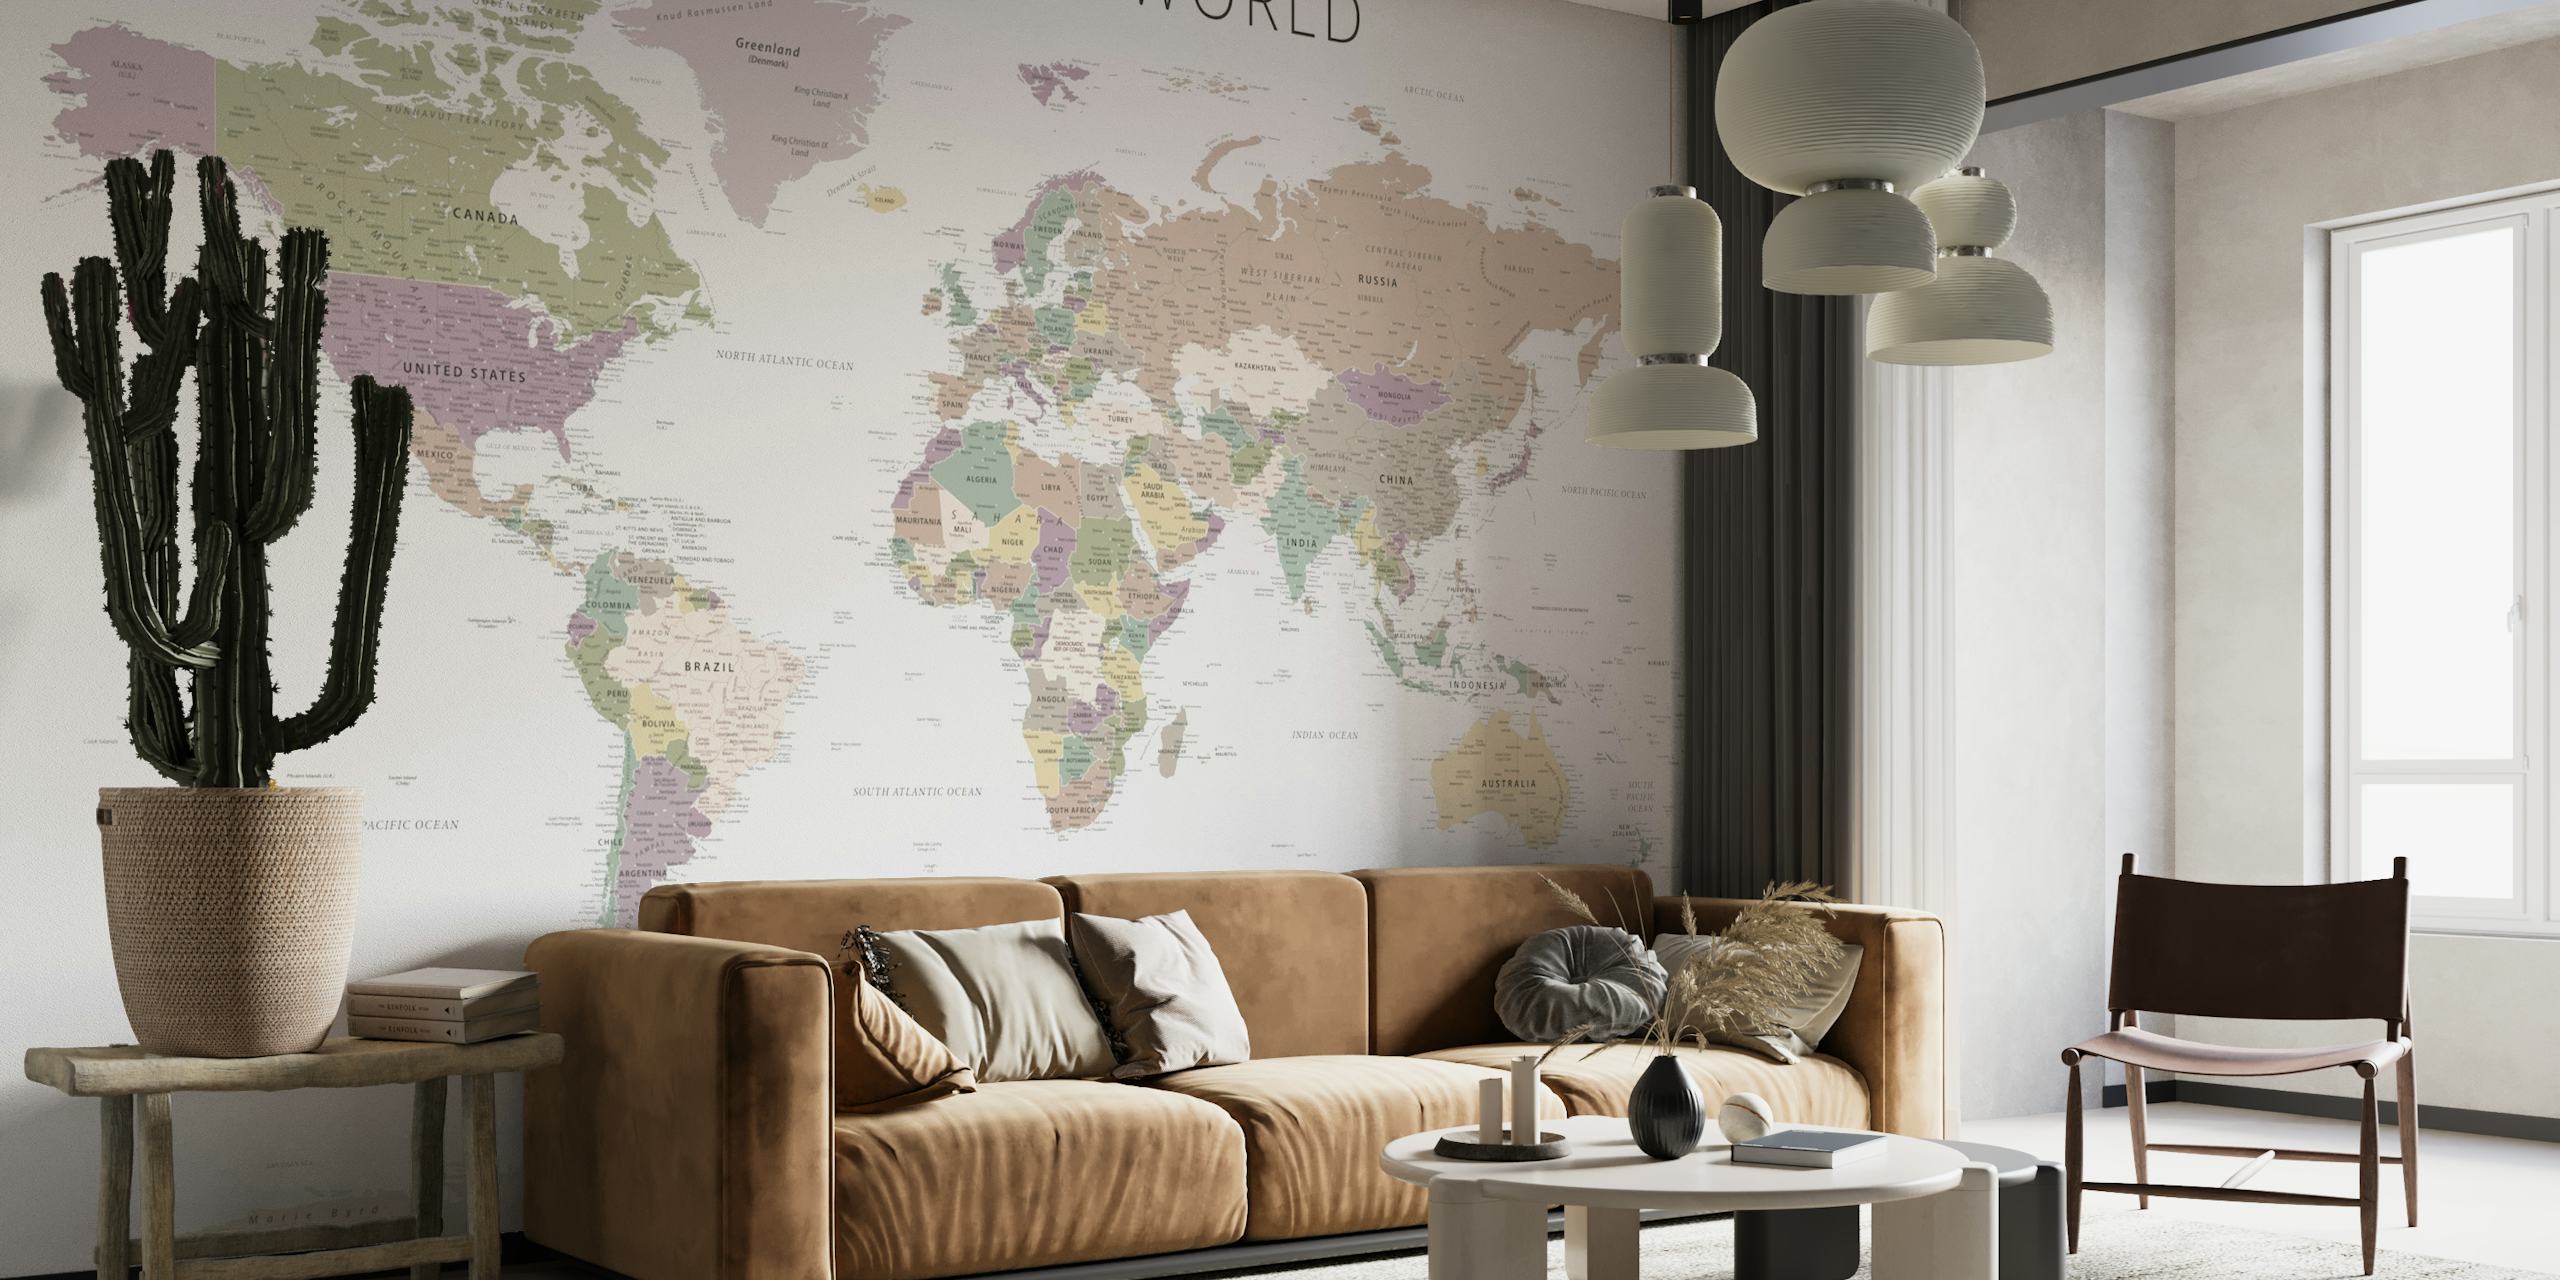 World map wall mural in muted neutral tones with detailed countries and borders